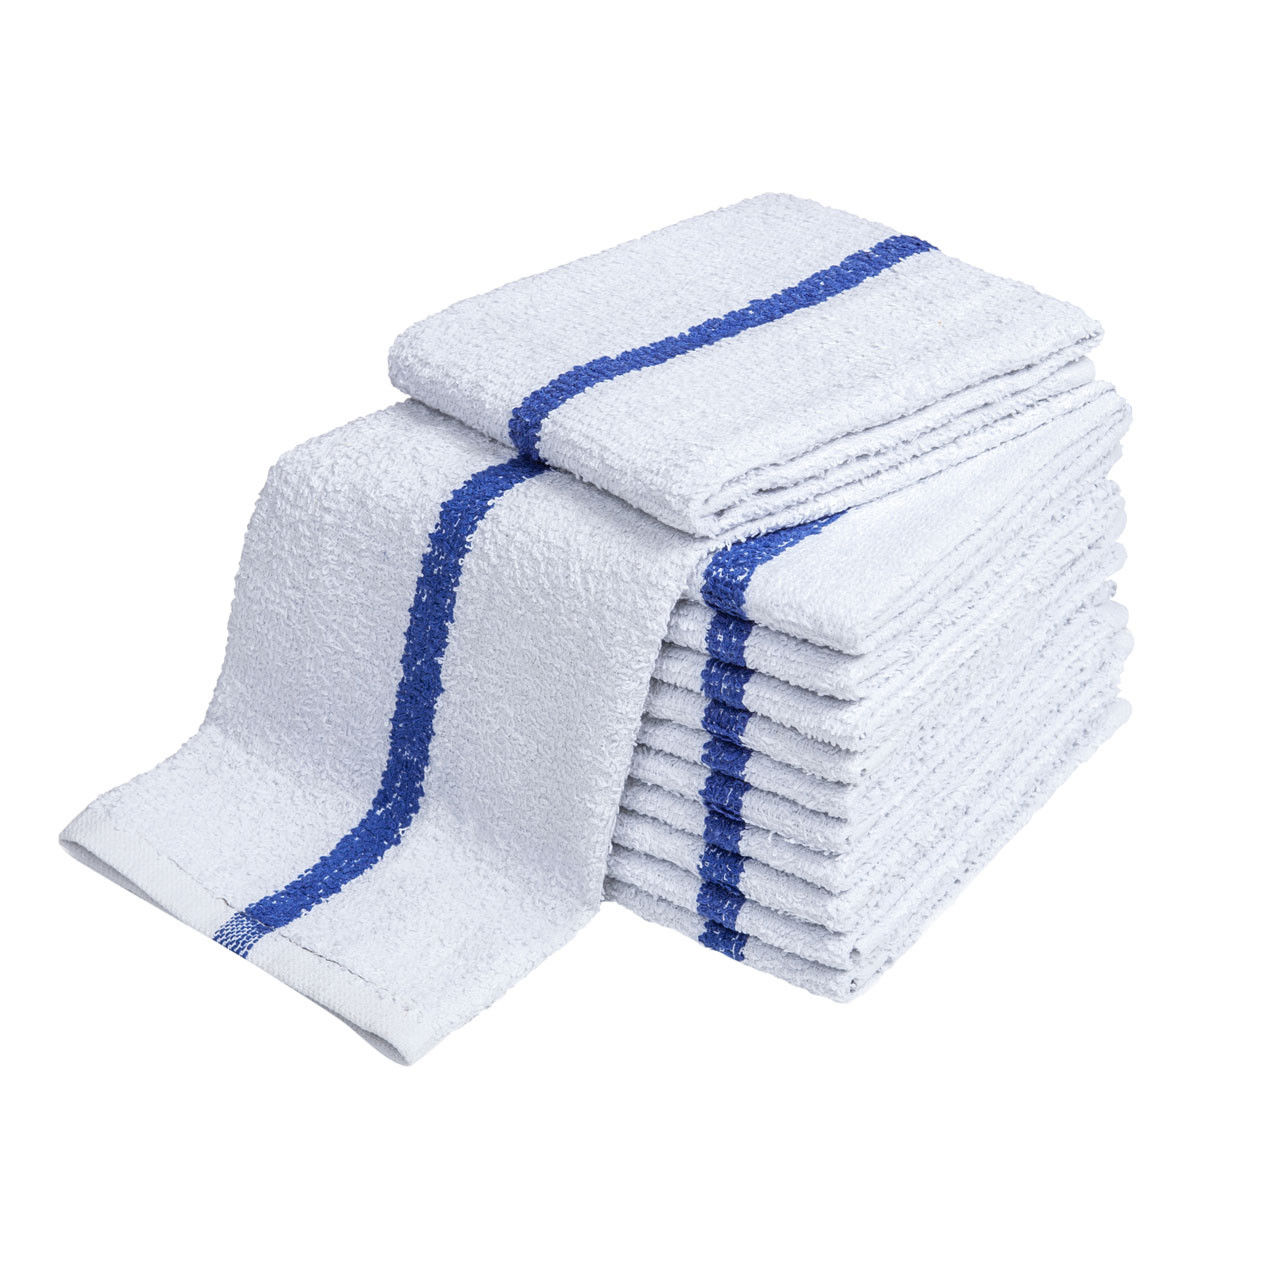 What is the difference between bar towels and dish towels?